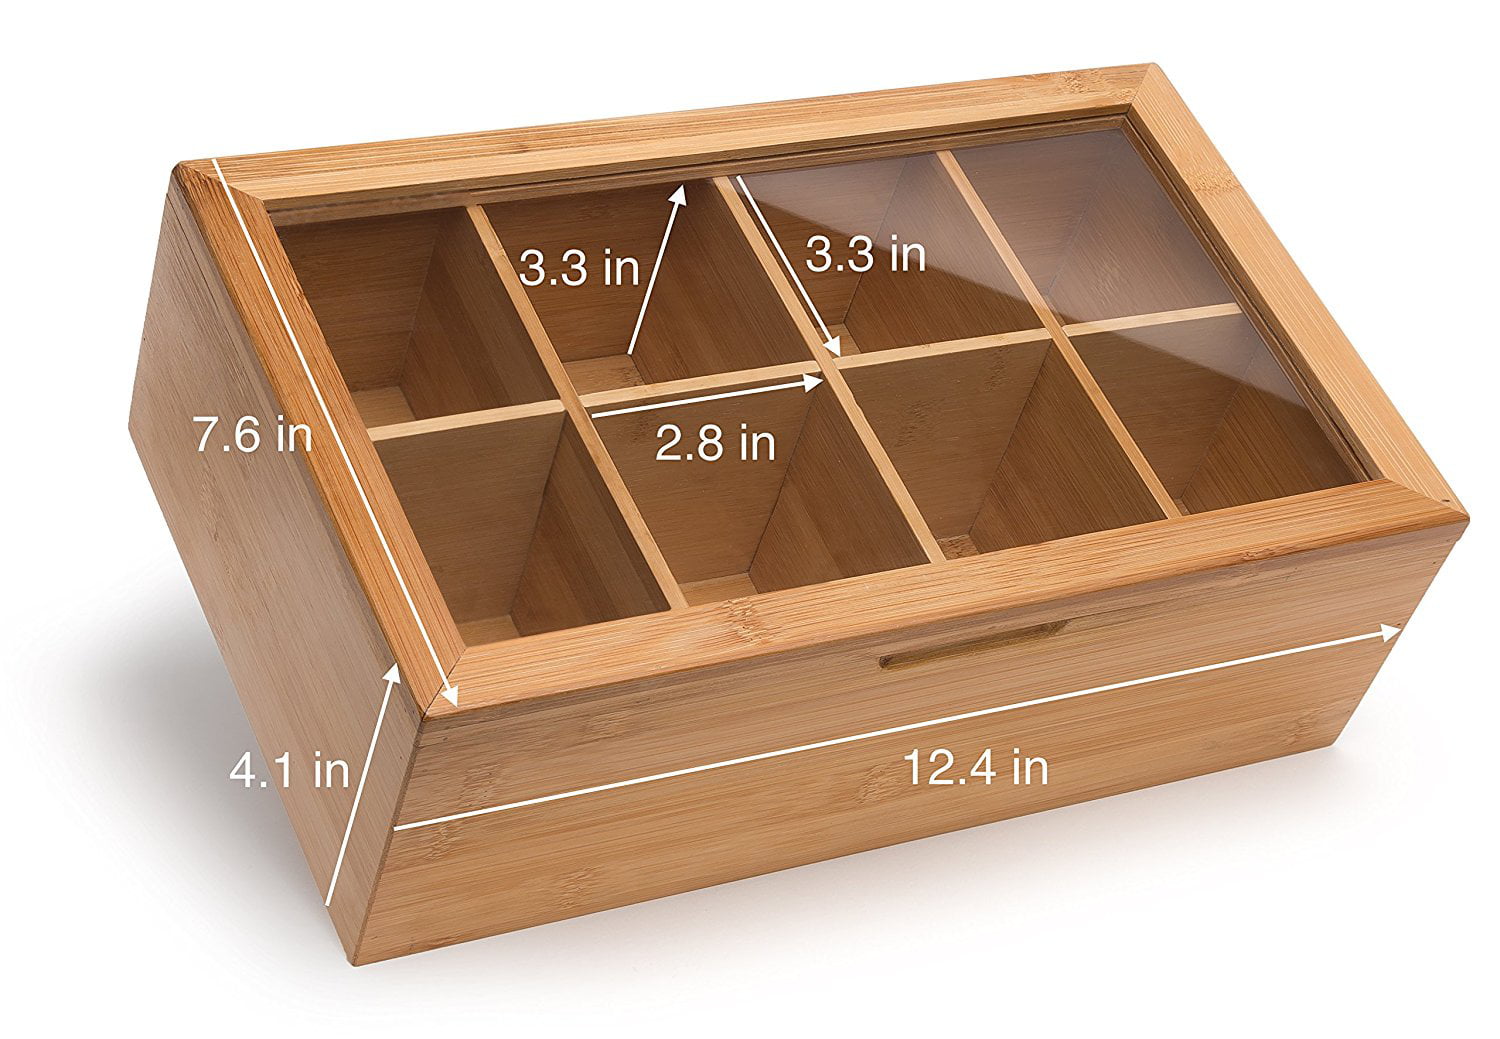 Creamers Tea Sugar Packets Bamboo Tea Box Organizer with Drawer Natural Wood Tea Bag Holder Chest with 8 Storage Compartments for Coffee Sweeteners Drink Pods Packets